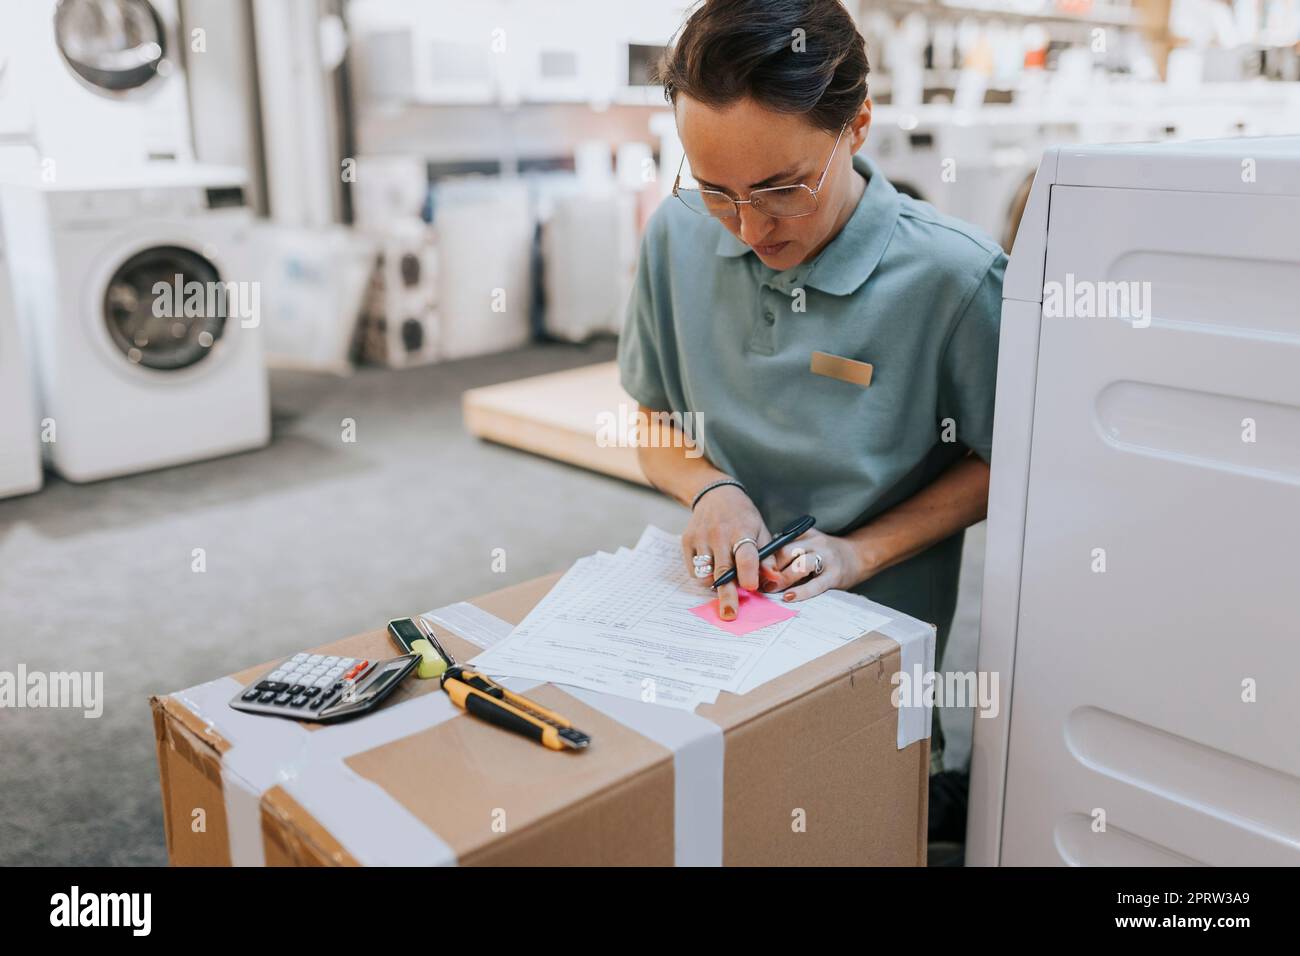 Female sales clerk doing paperwork while working in appliances store Stock Photo